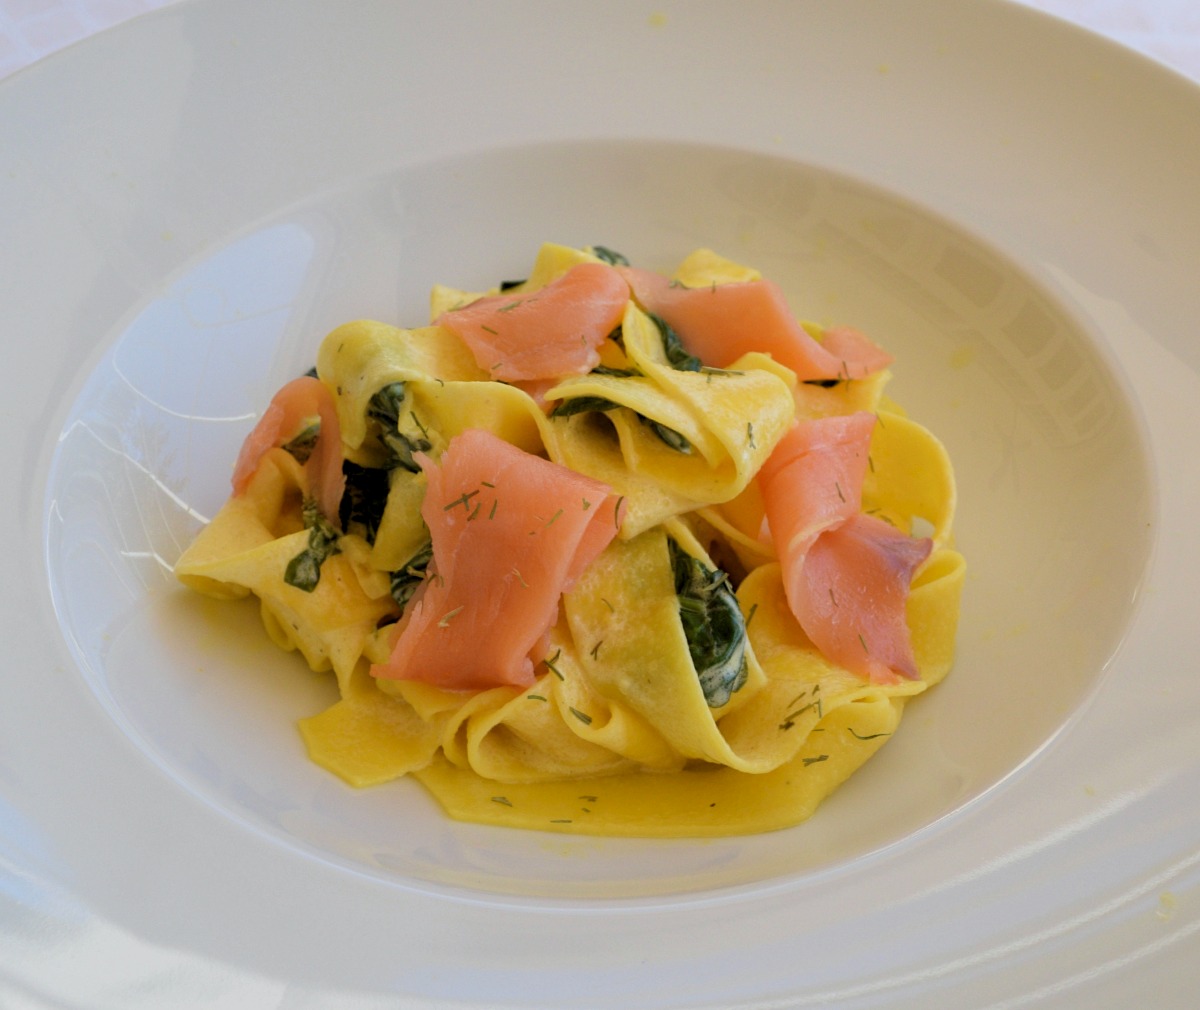 Pappardelle with Smoked Salmon and Spinach in Lemon Cream Sauce Recipe